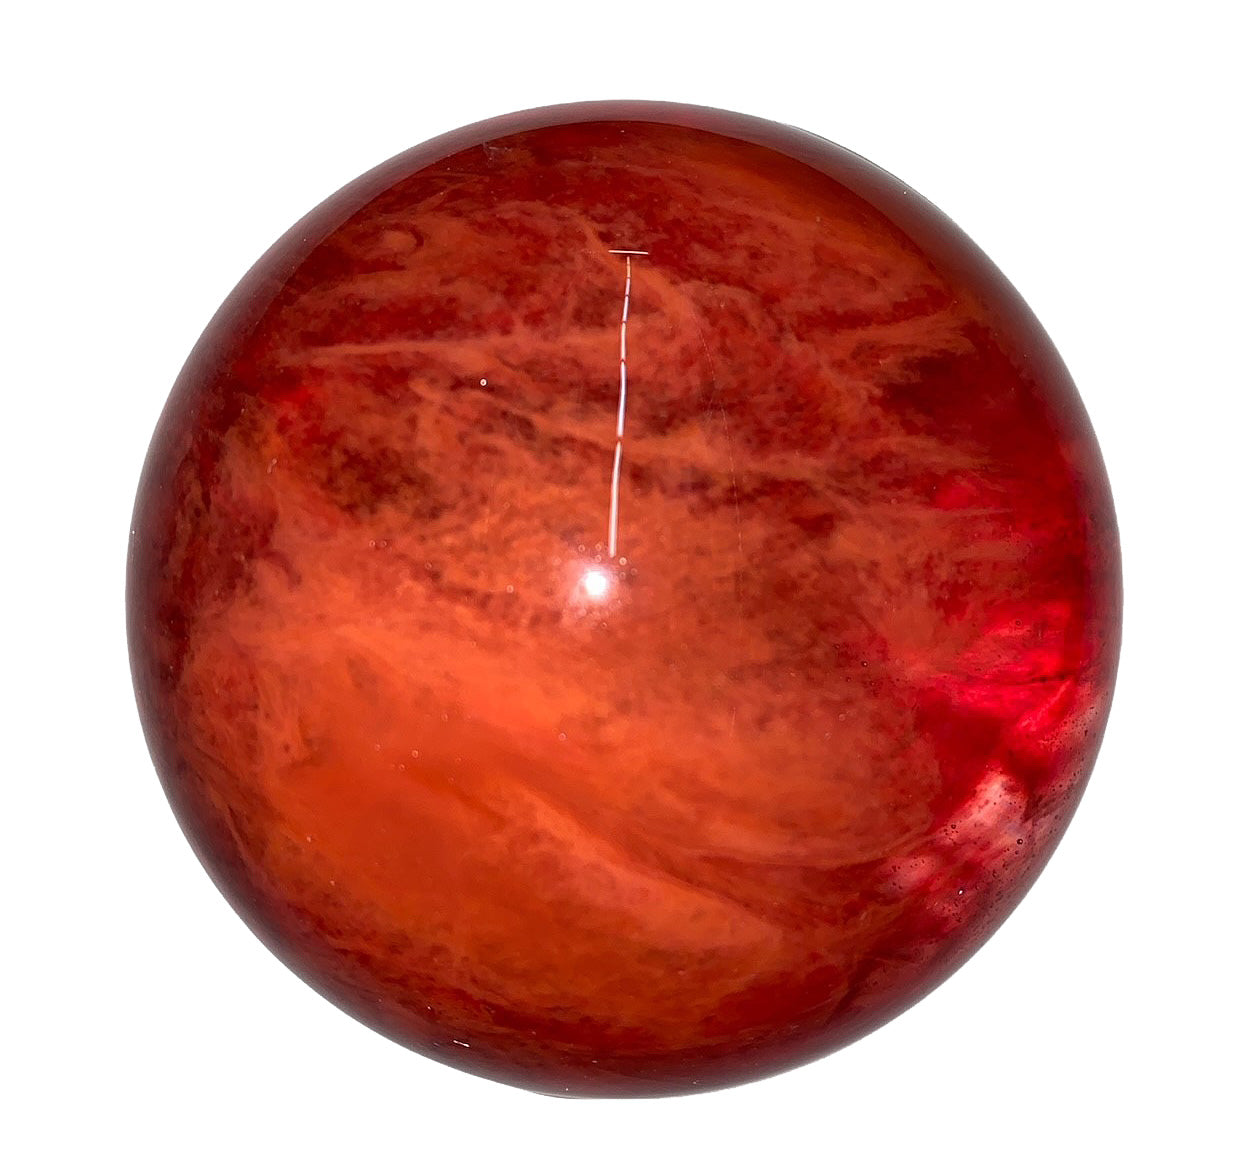 RED SMELTER PLANET - 12-17cm - Glass Sphere - Sold by the gram - China - NEW921